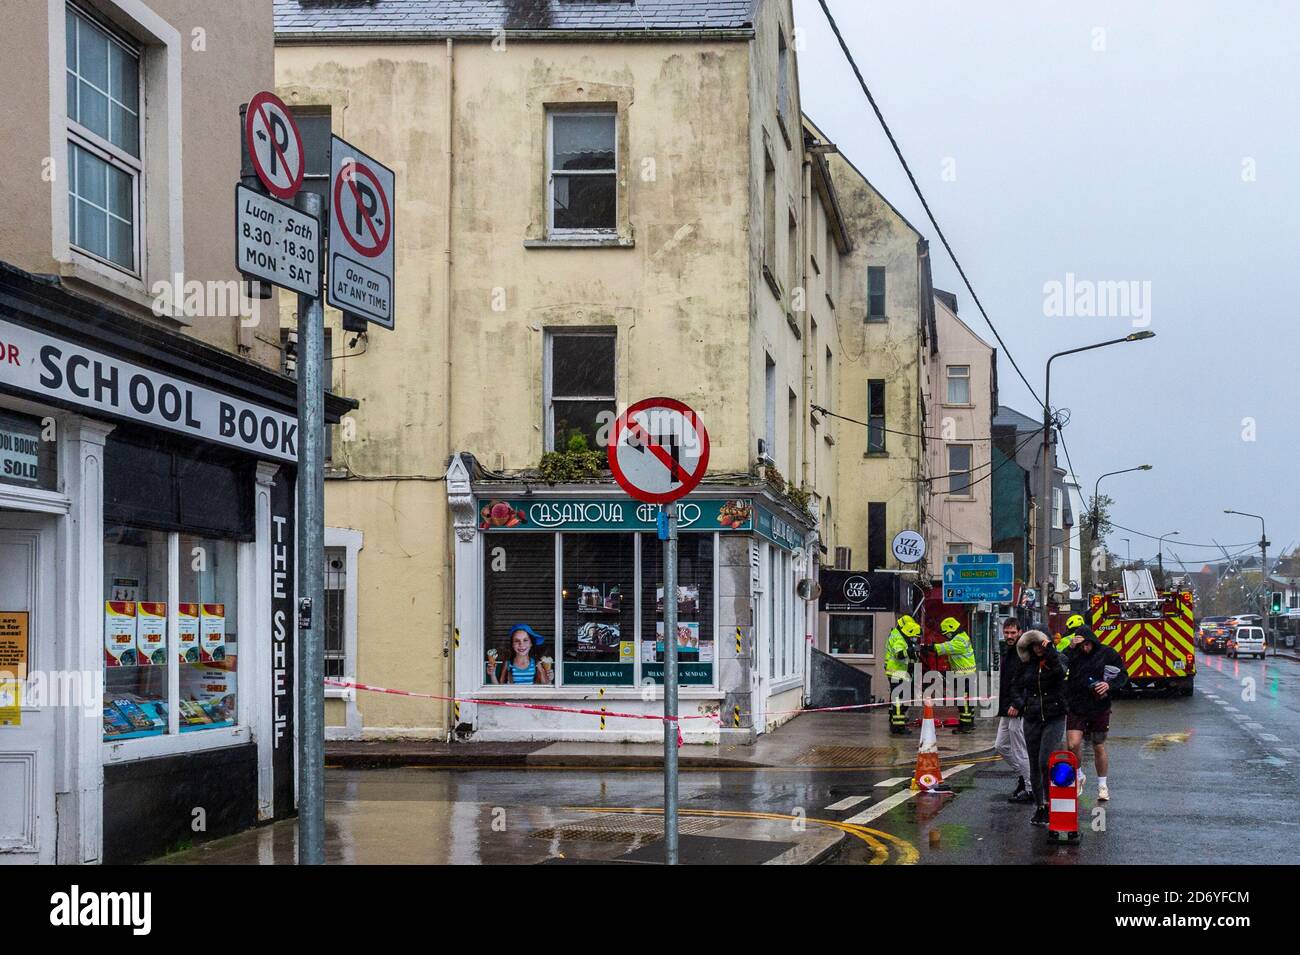 Cork, Ireland. 20th Oct, 2020. Slates fell off a building on the corner of Dunbar Street and George's Quay this morning, due to the high winds. The fire brigade attended to make the roof safe. The road was closed for a short time. Credit: AG News/Alamy Live News Stock Photo